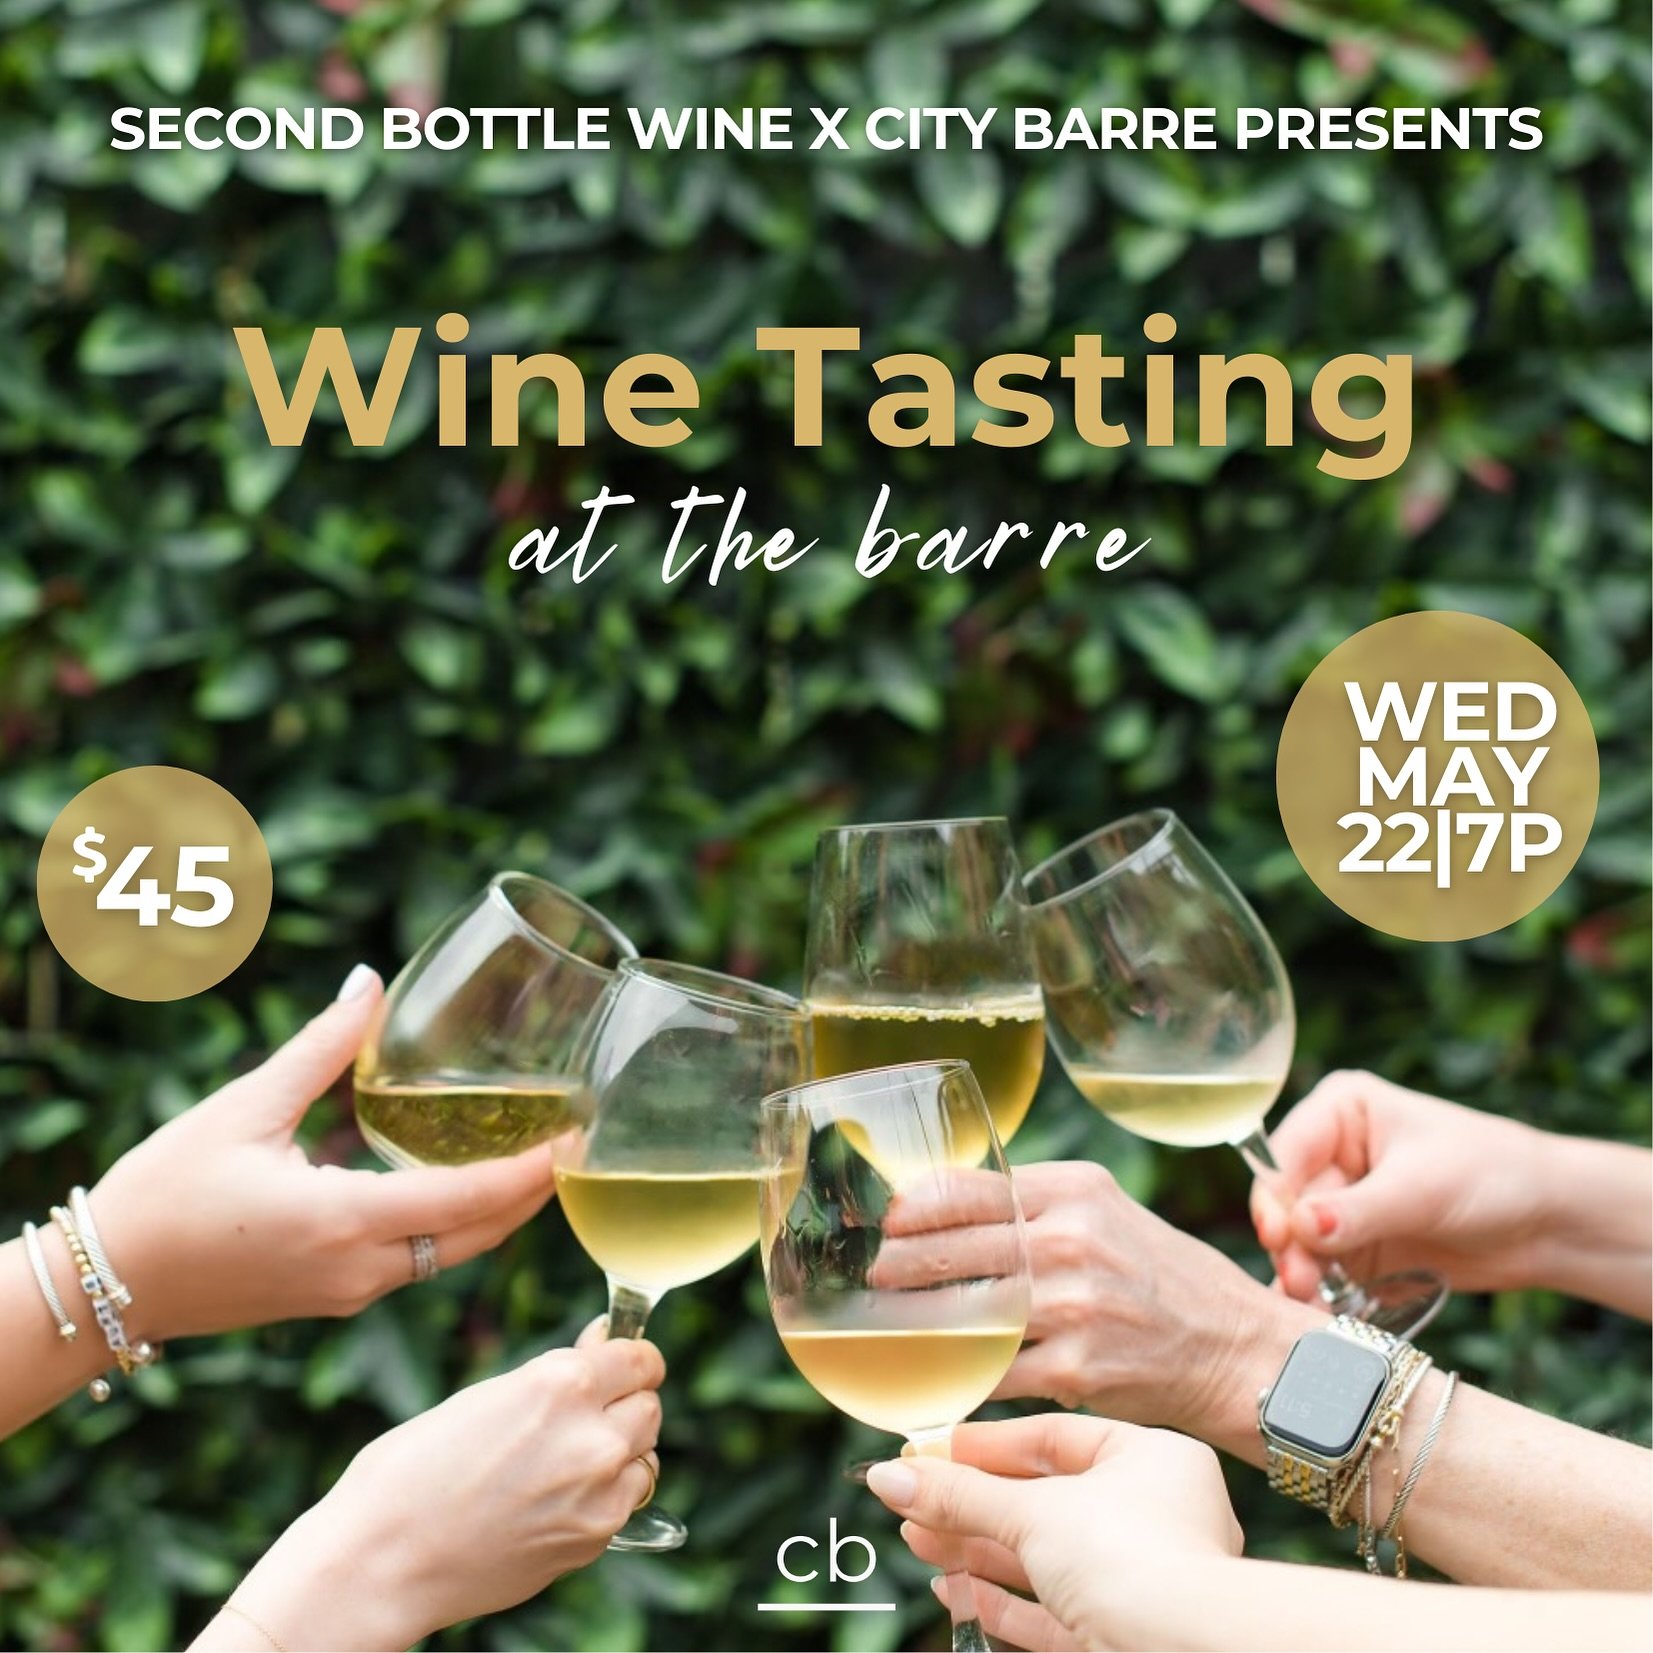 We all love wine but do you feel confident in what you&rsquo;re looking for when you&rsquo;re tasting a new wine? 🤔 If not, we have the perfect class for you! 

We&rsquo;re so excited to welcome Erin from @secondbottlewine to the studio to teach us 